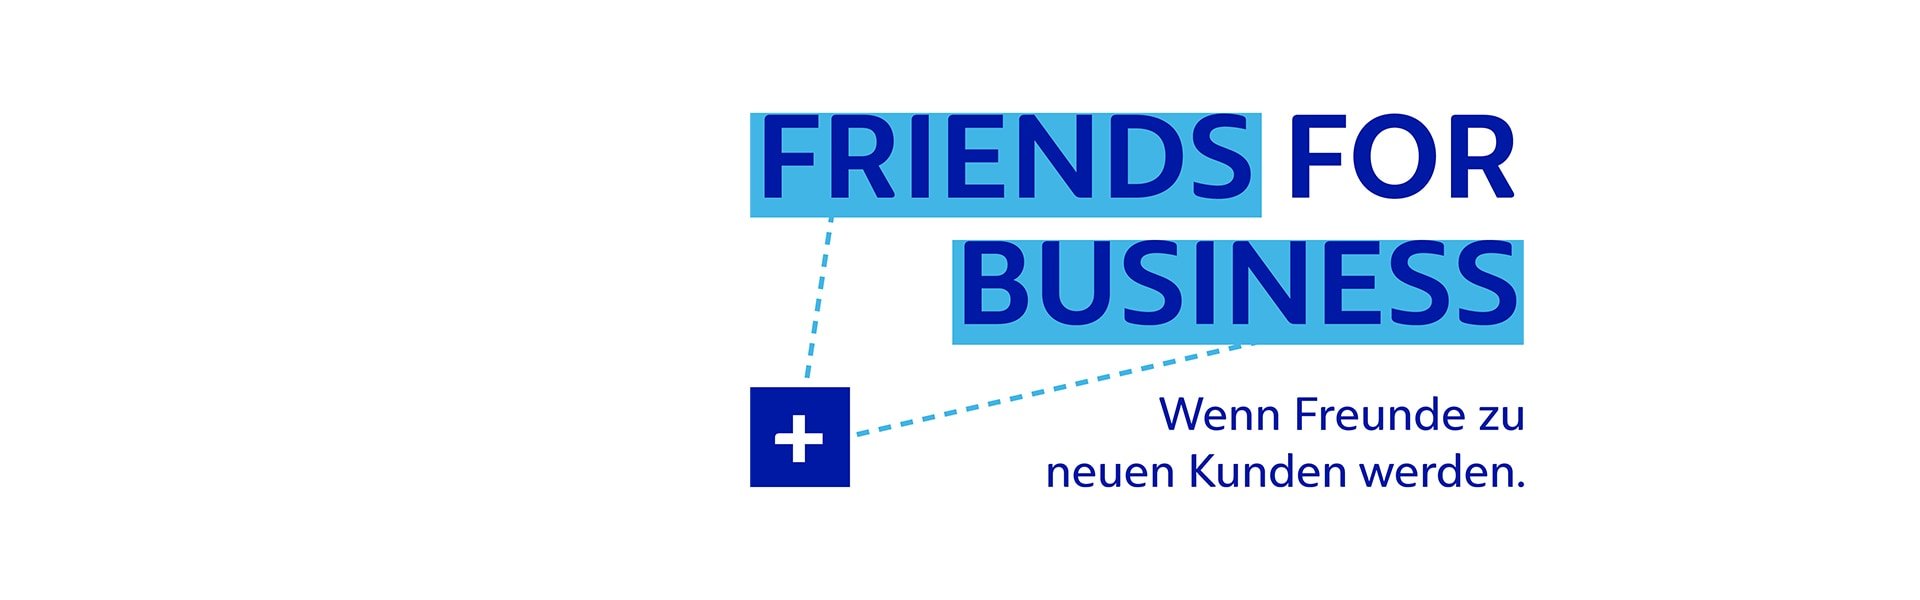 Friends for Business